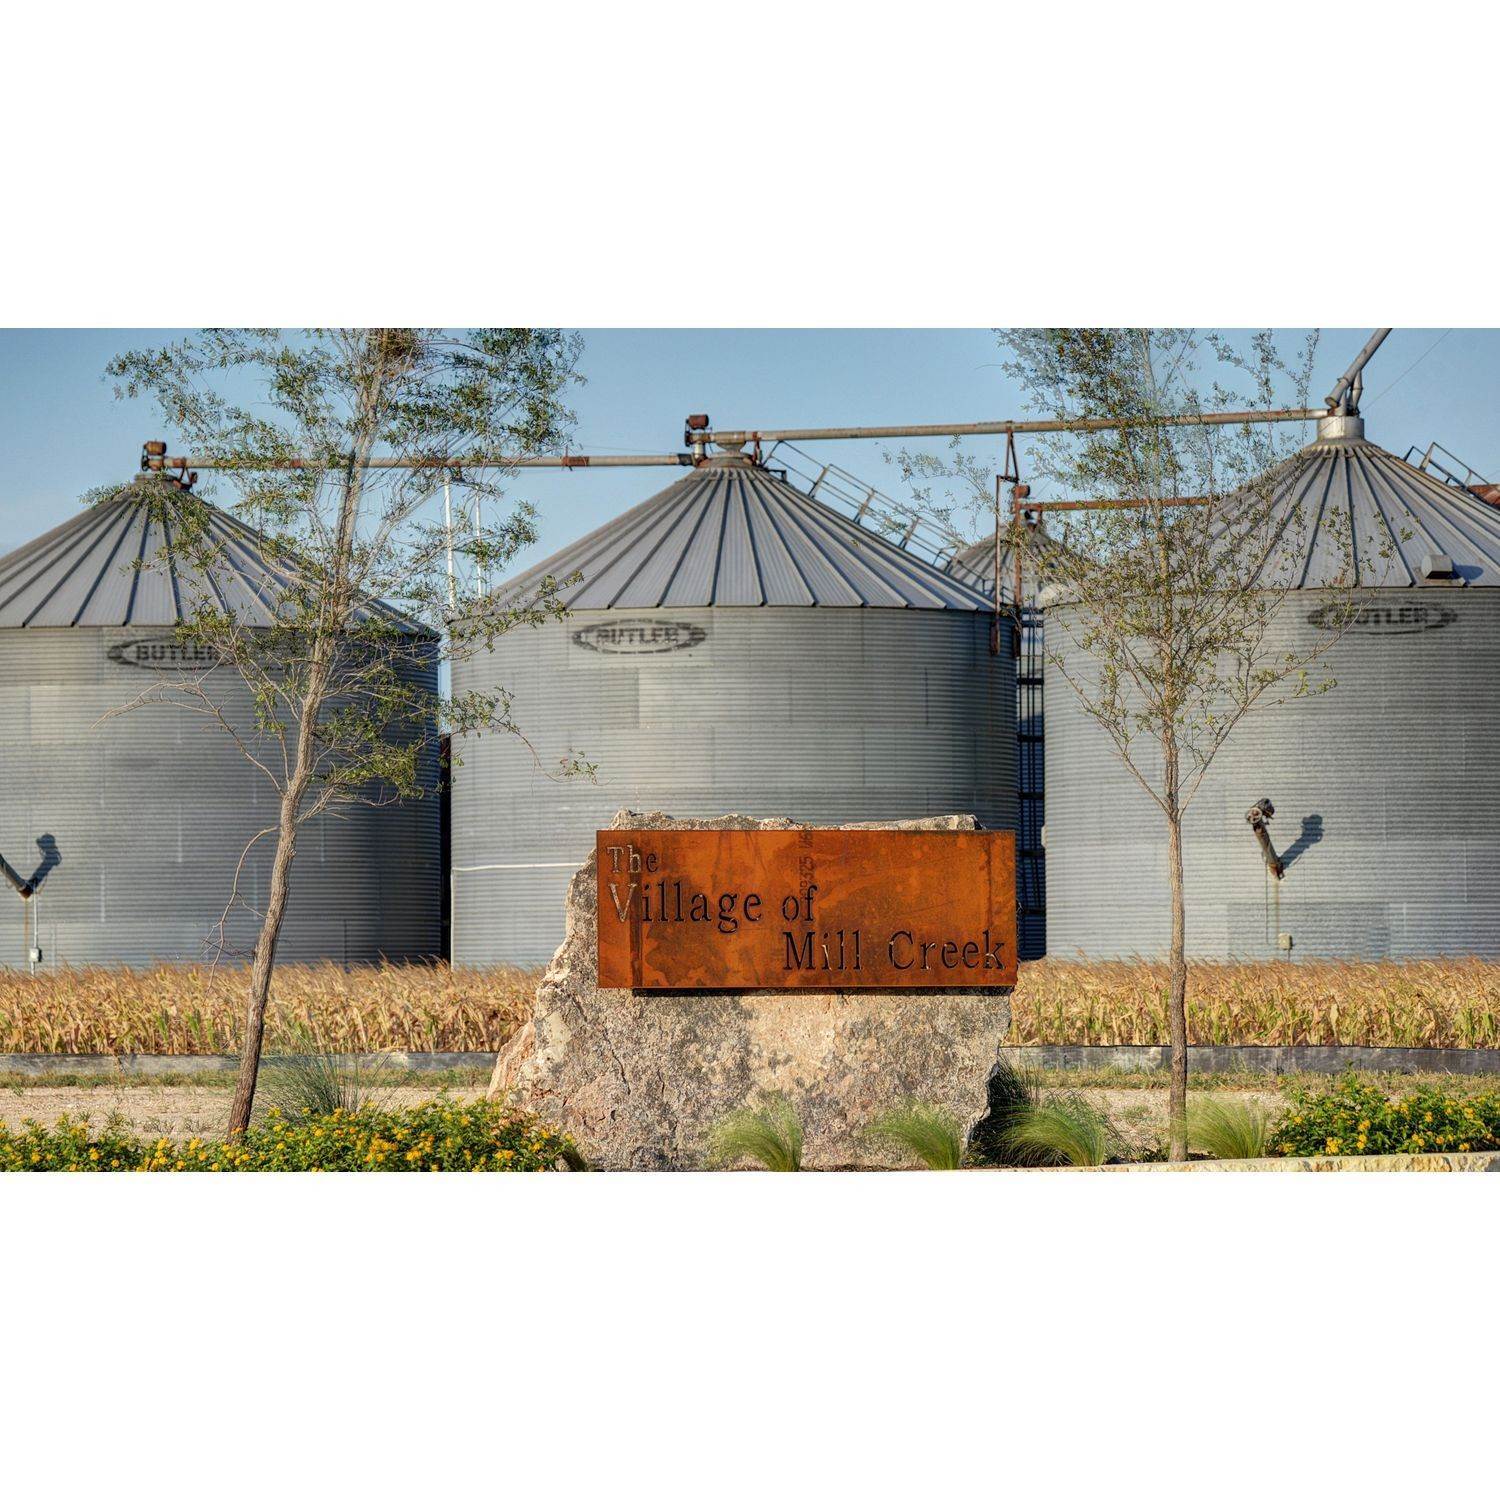 3. The Village of Mill Creek 50' xây dựng tại 2809 Pearl Barley, Seguin, TX 78155